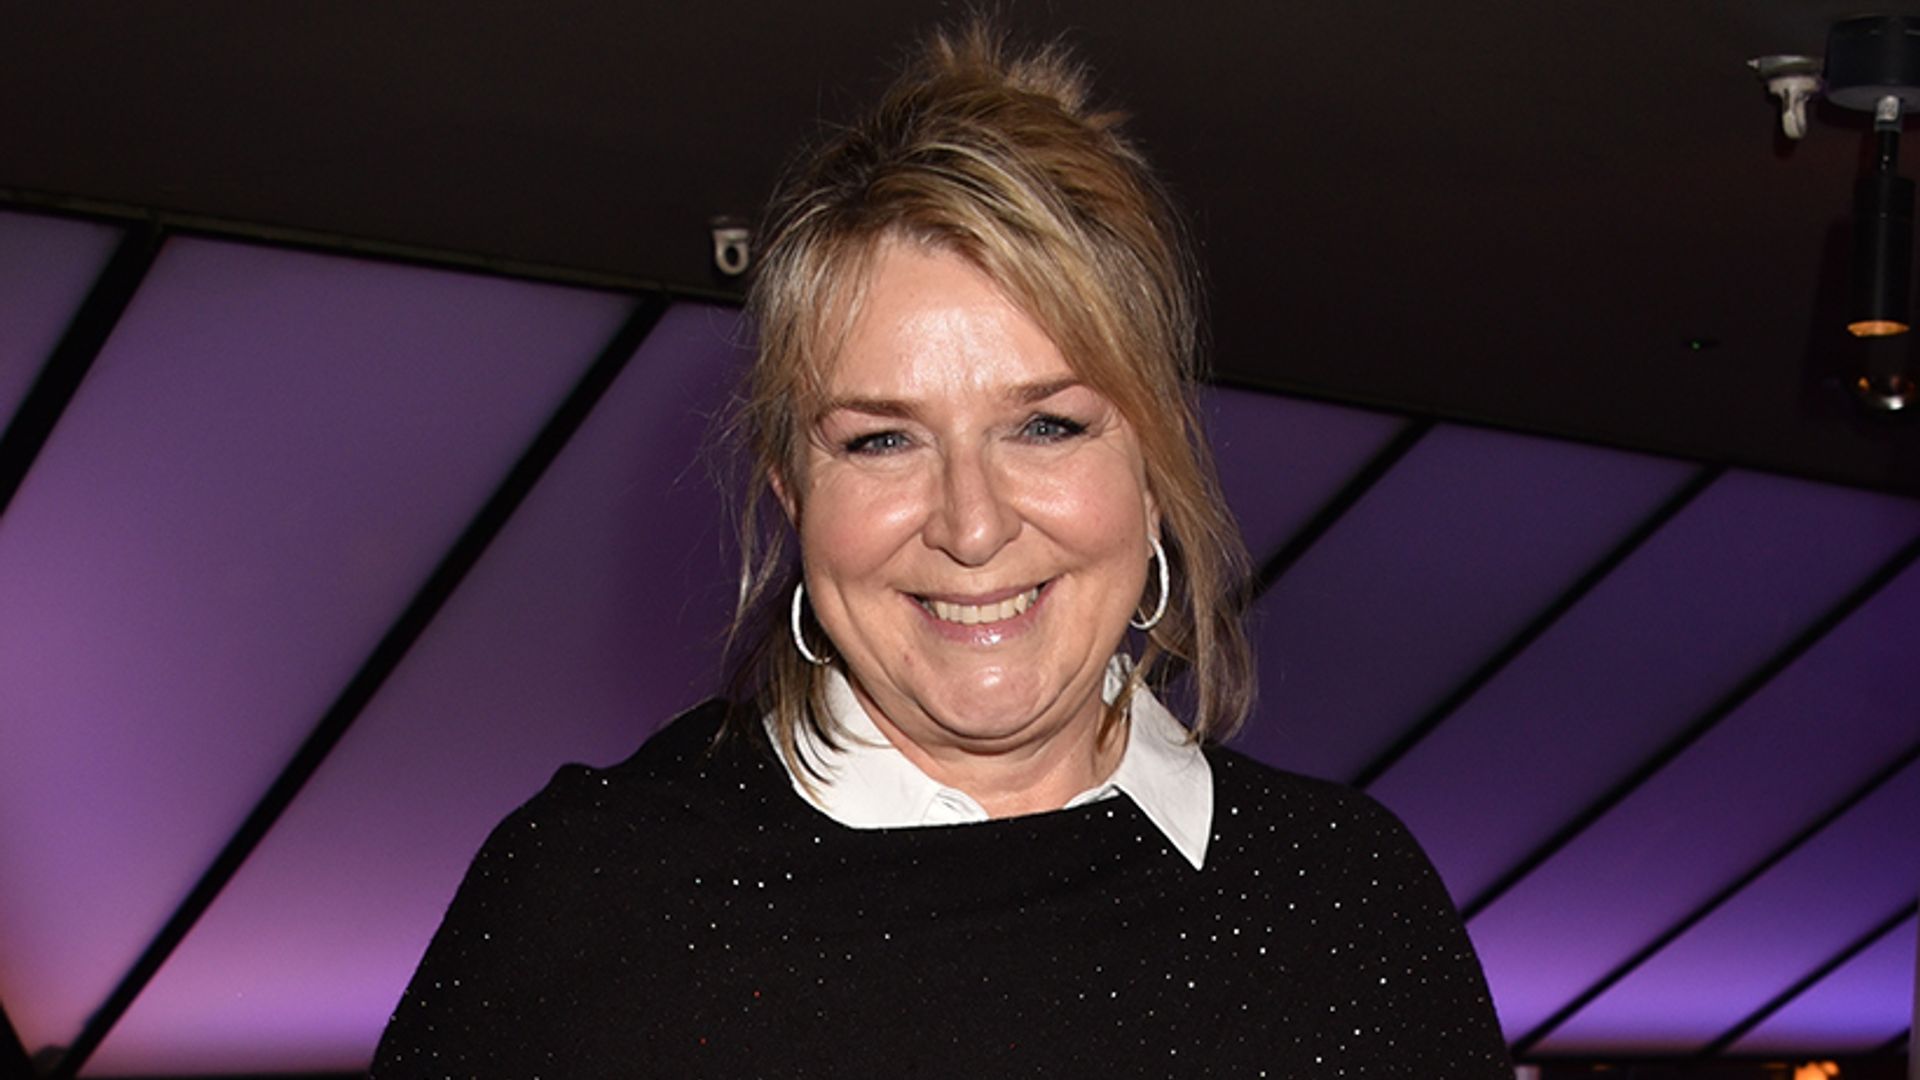 Fern Britton has had a chic new makeover – see the results